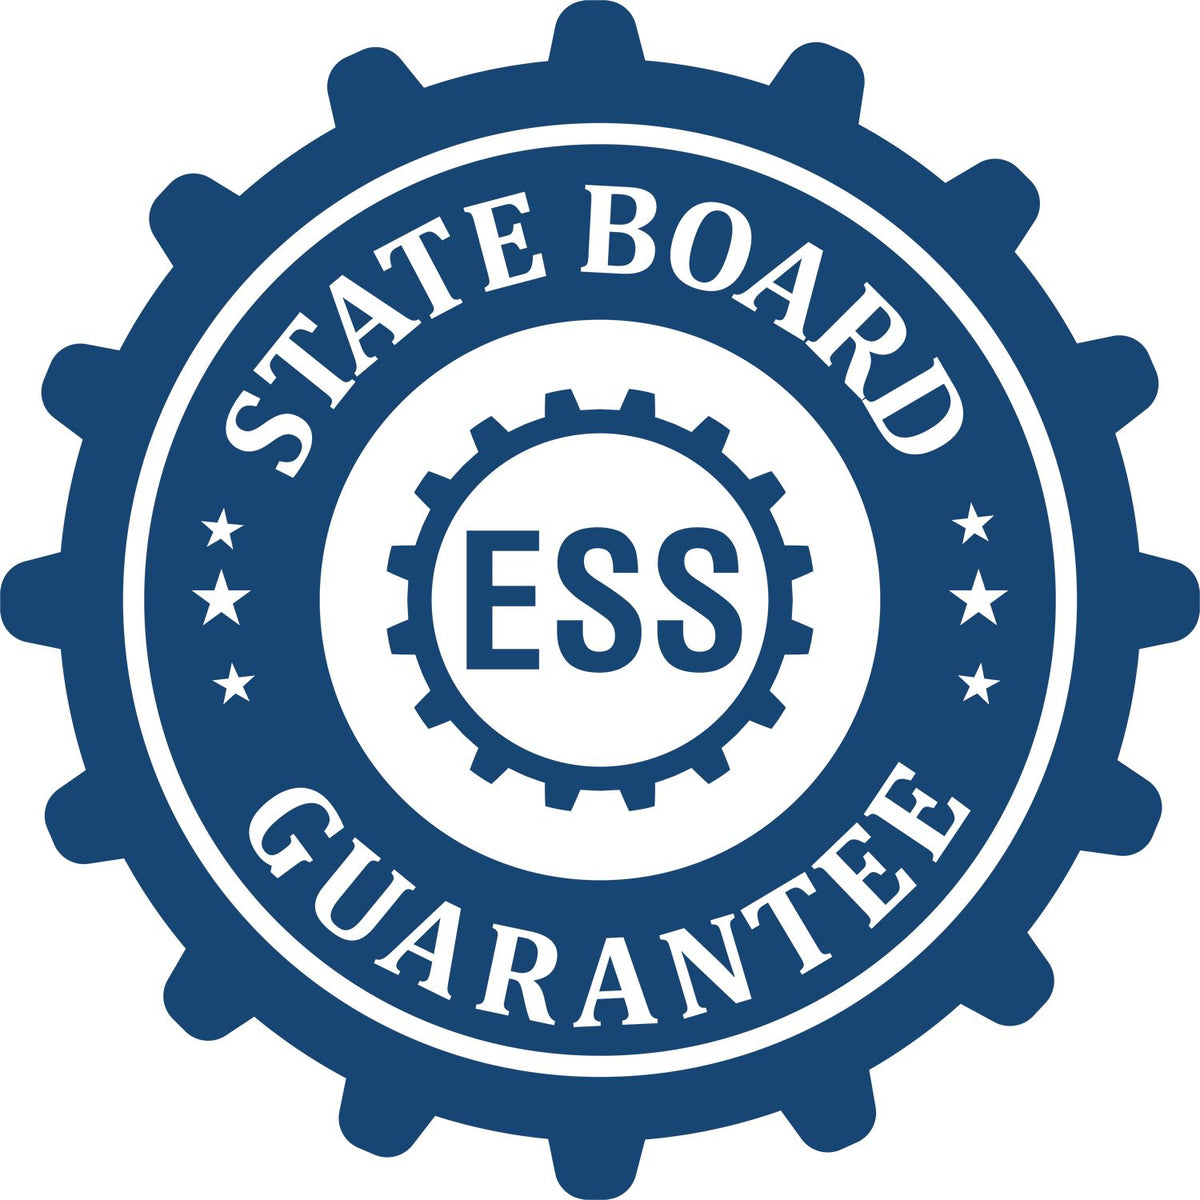 An emblem in a gear shape illustrating a state board guarantee for the Hybrid Georgia Geologist Seal